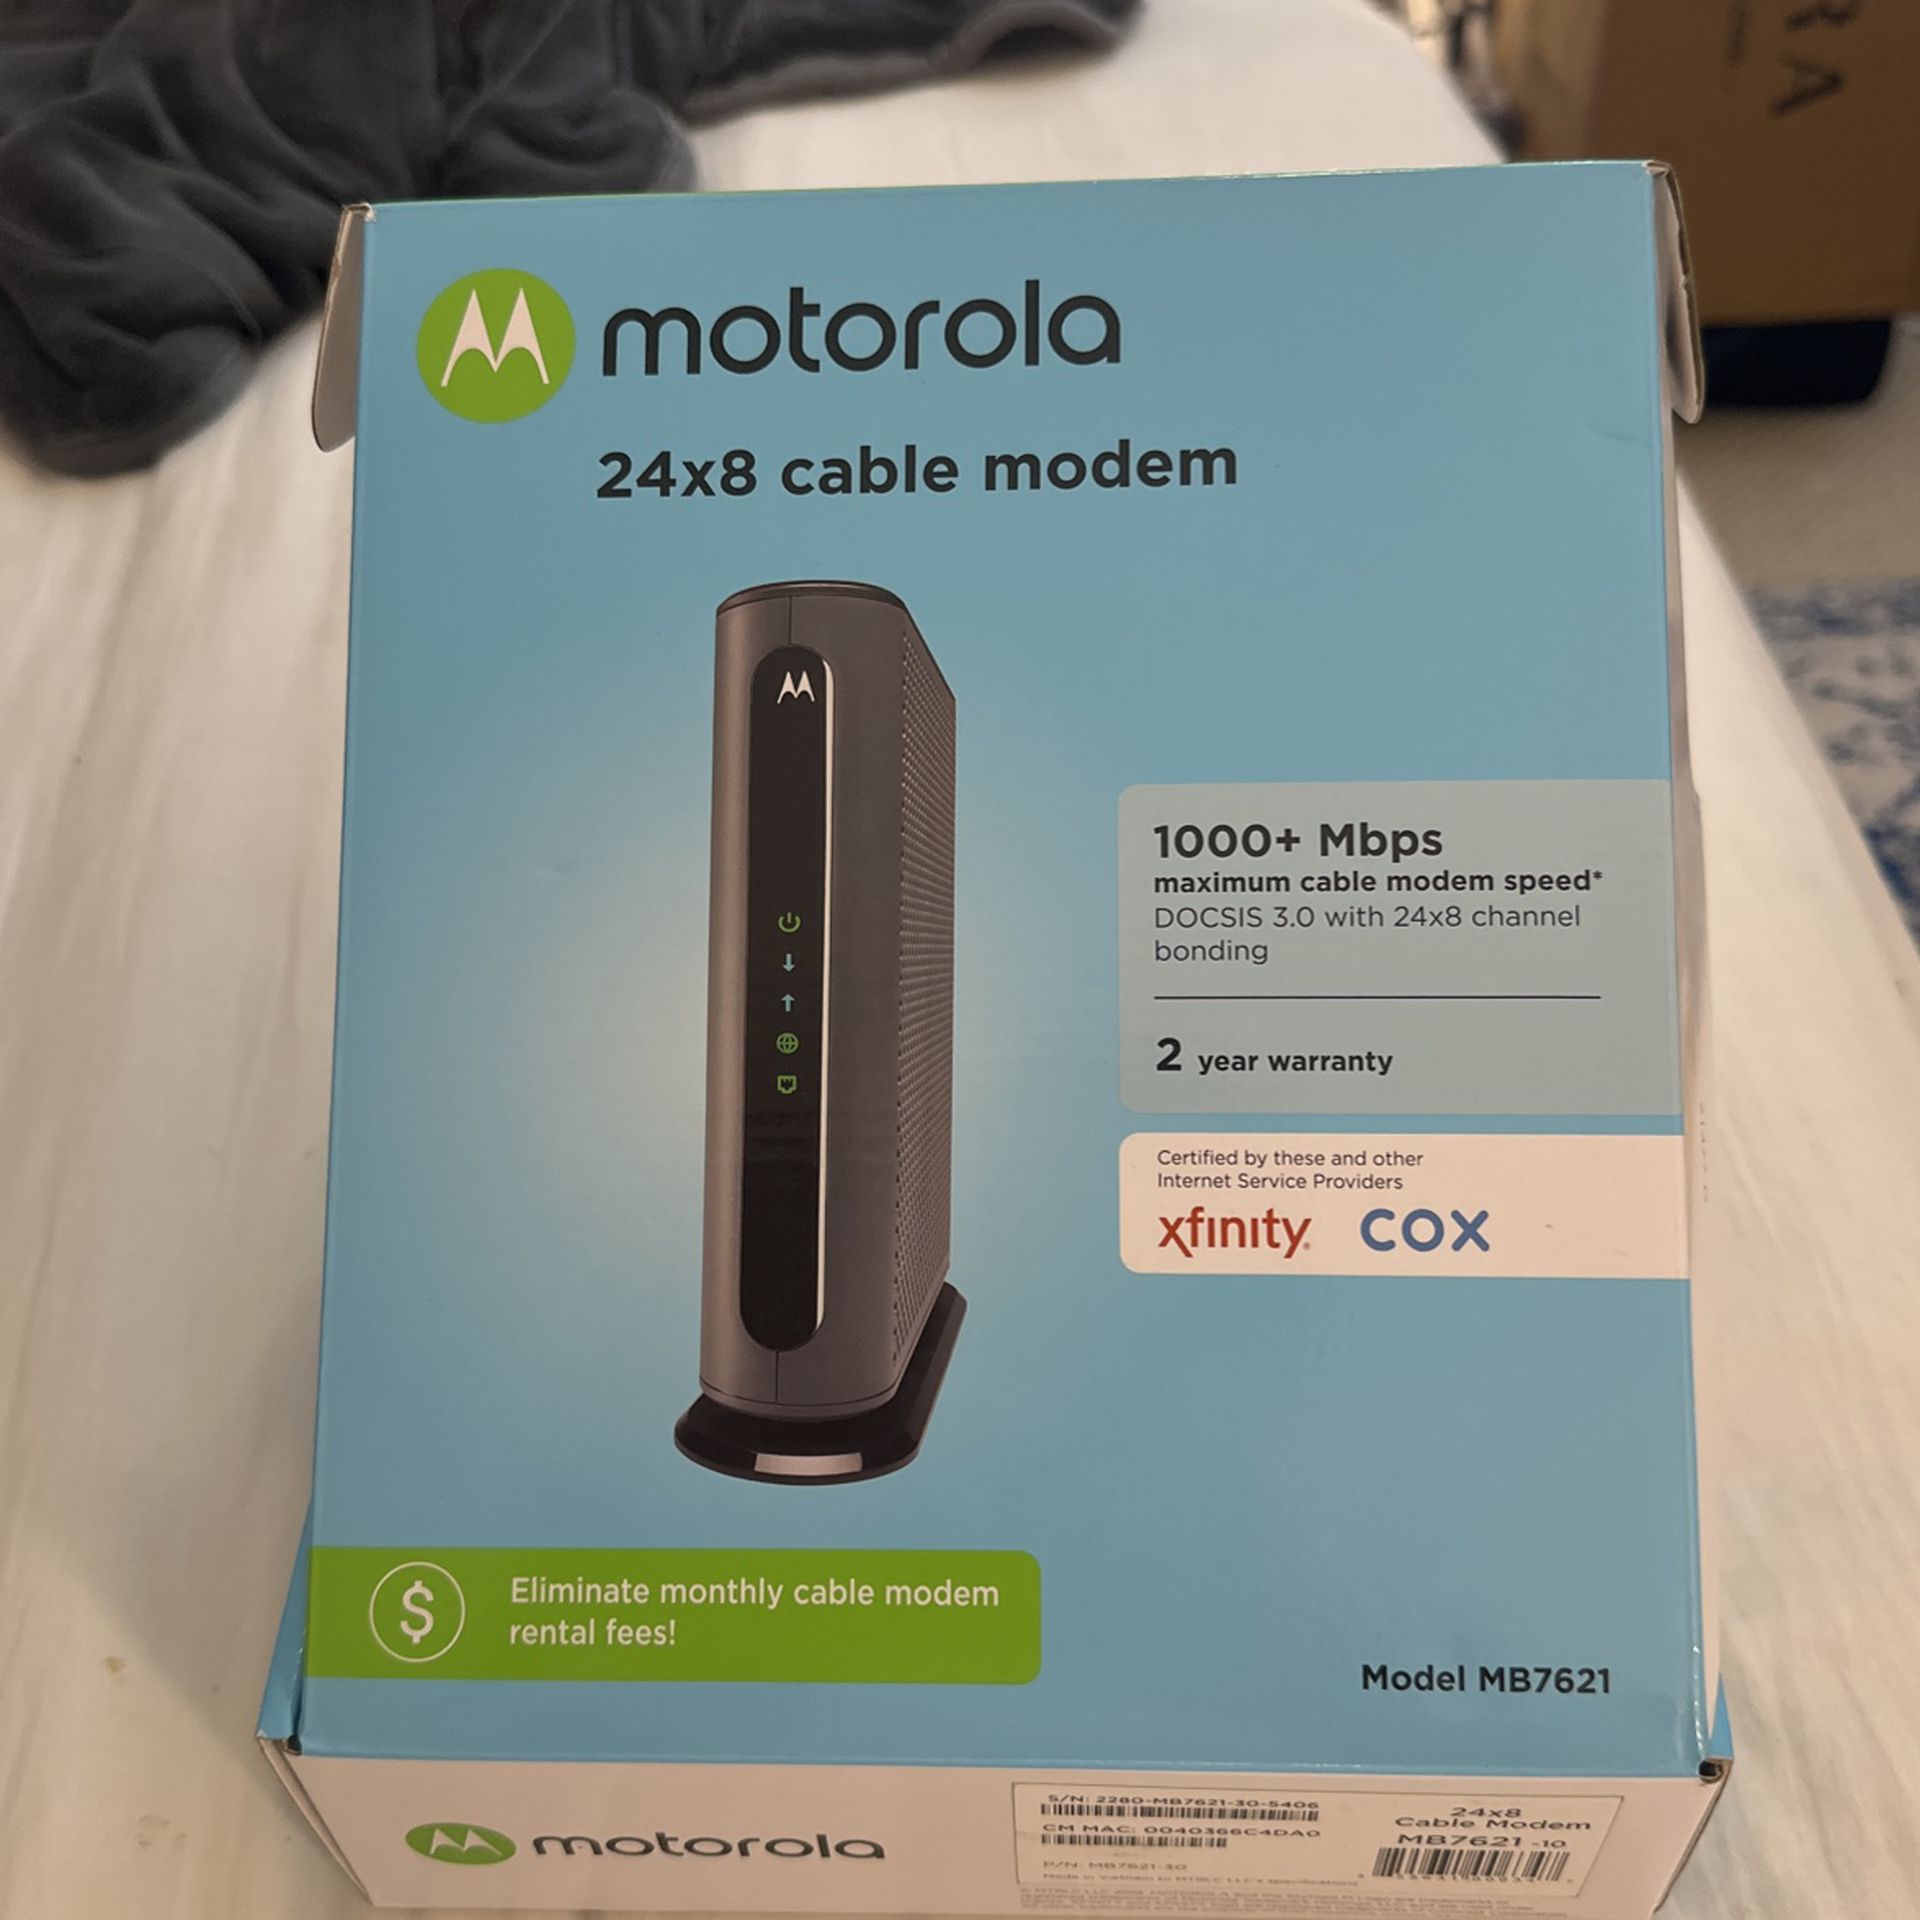 Motorola MB7621 Cable Modem | Pairs with Any WiFi Router | Approved by Comcast Xfinity, Cox, and Spectrum | for Cable Plans Up to 900 Mbps DOCSIS 3.0